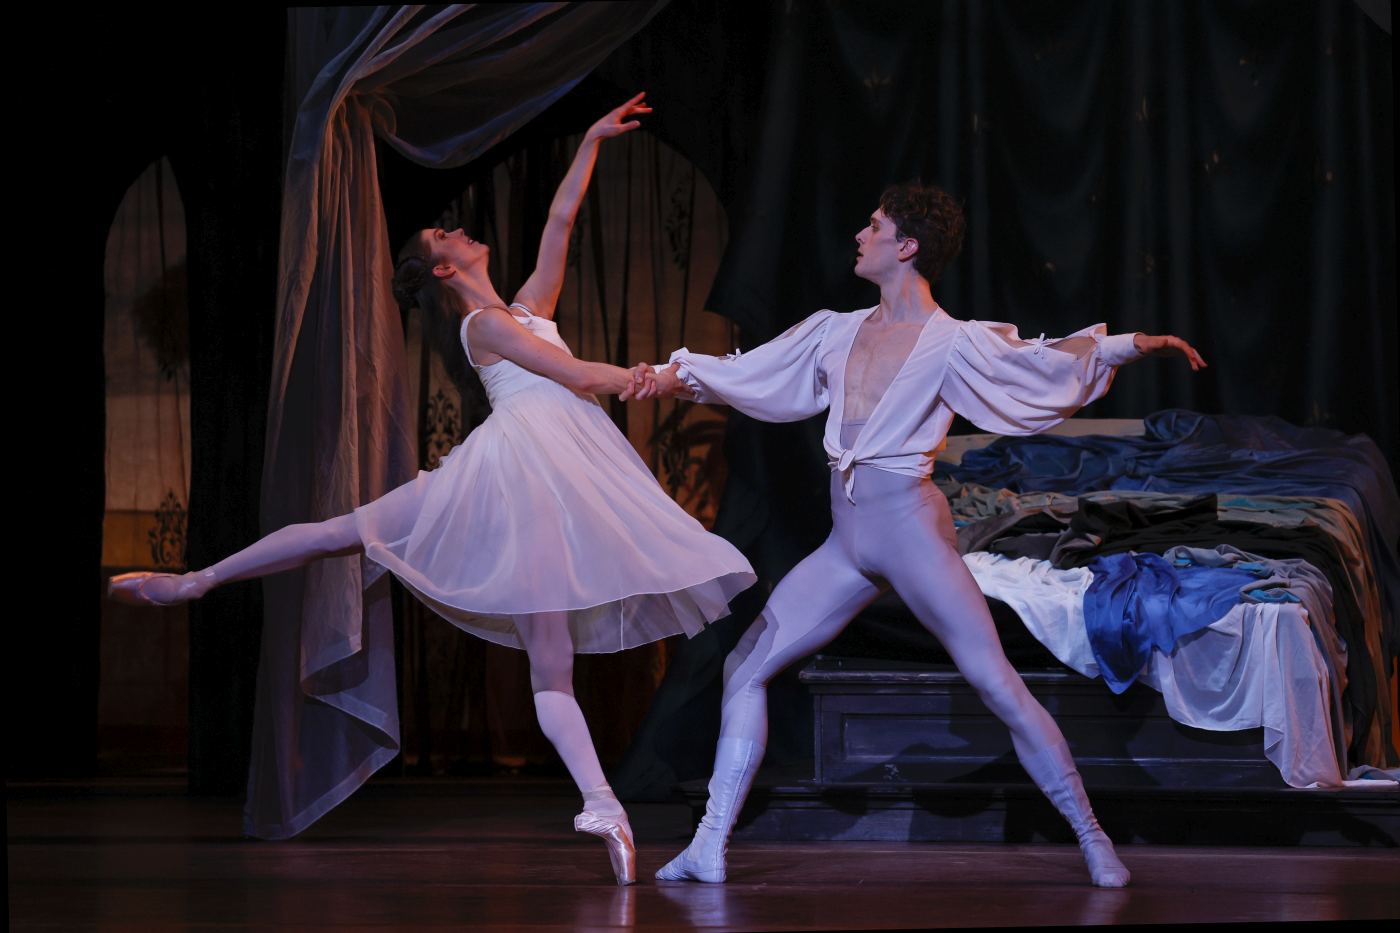 9. S.Spencer (Juliet) and C.Linnane (Romeo), “Romeo and Juliet” by J.Cranko, The Australian Ballet 2022 © J.Busby